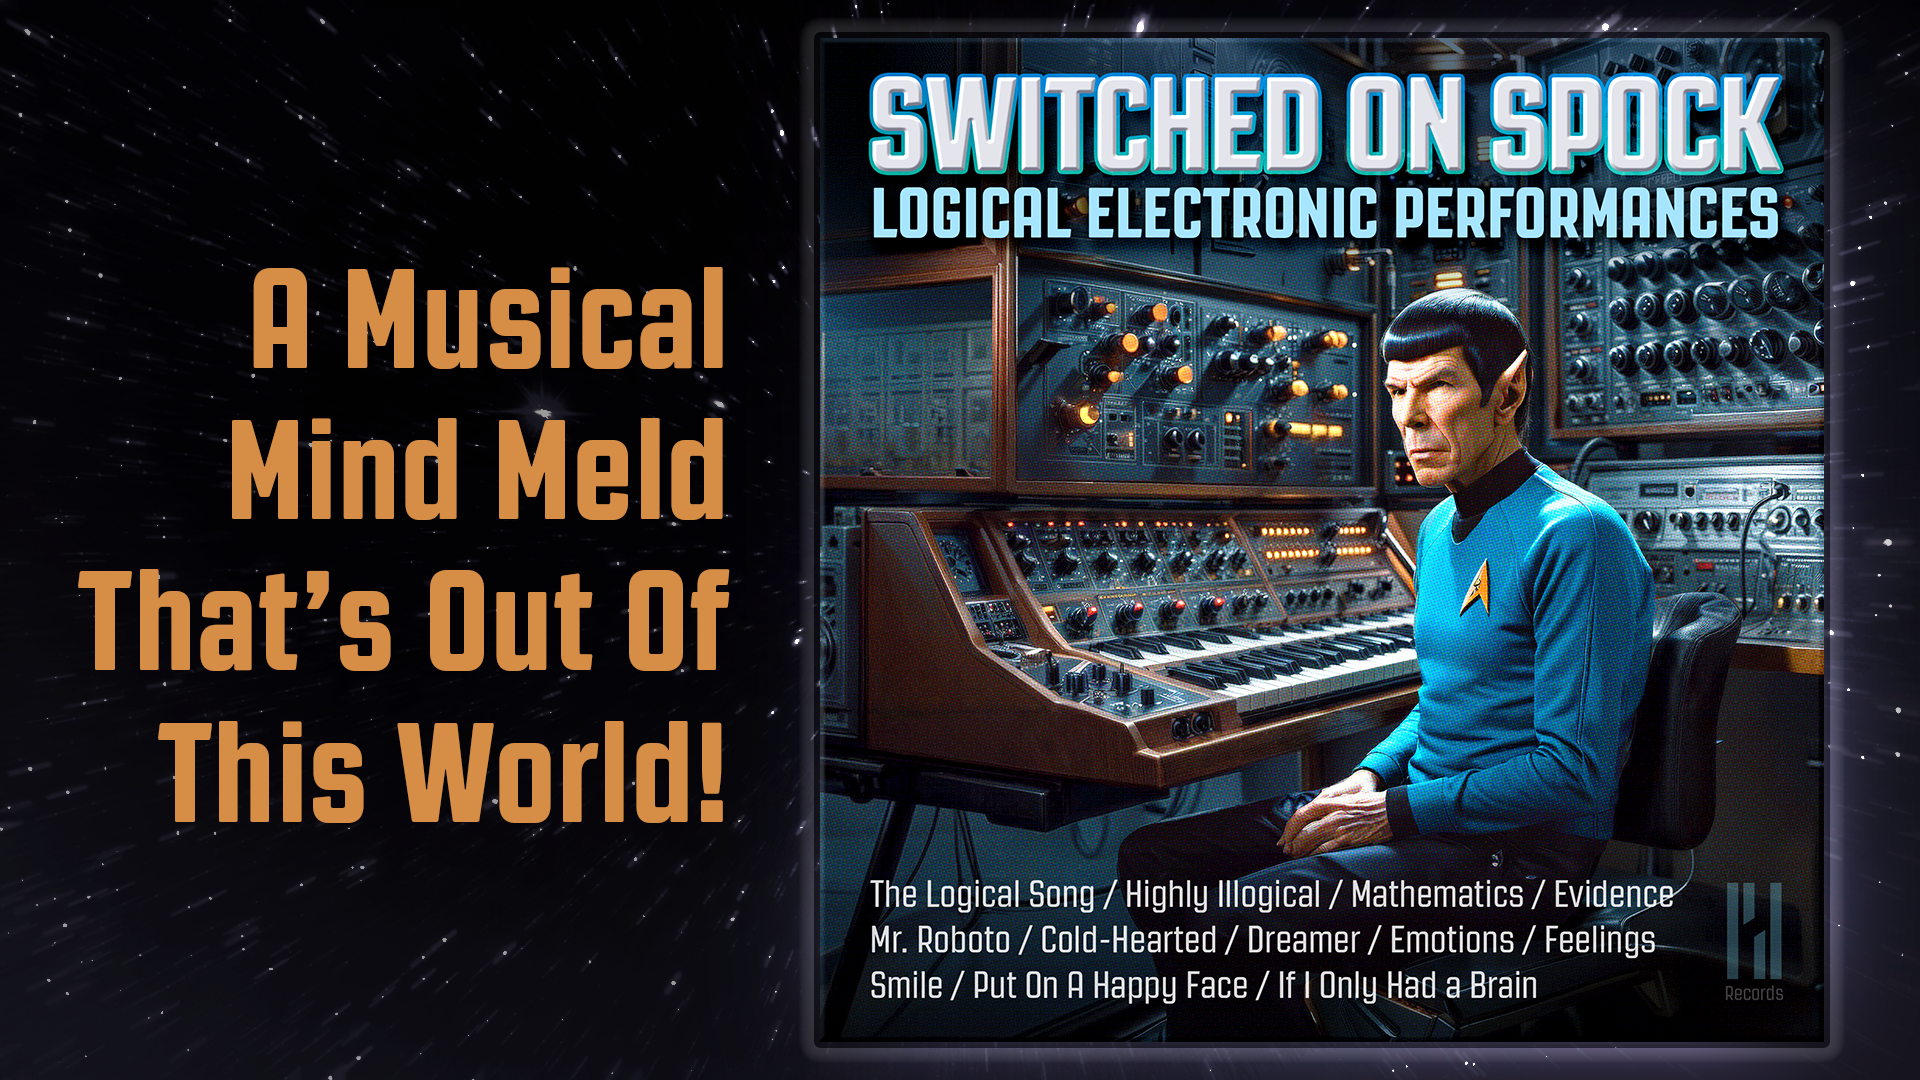 Album cover for 'Switched On Spock: Logical Electronic Performances' featuring Mr. Spock seated at a synthesizer in a blue Starfleet uniform with the album's song titles listed below, set against a backdrop of electronic music equipment.